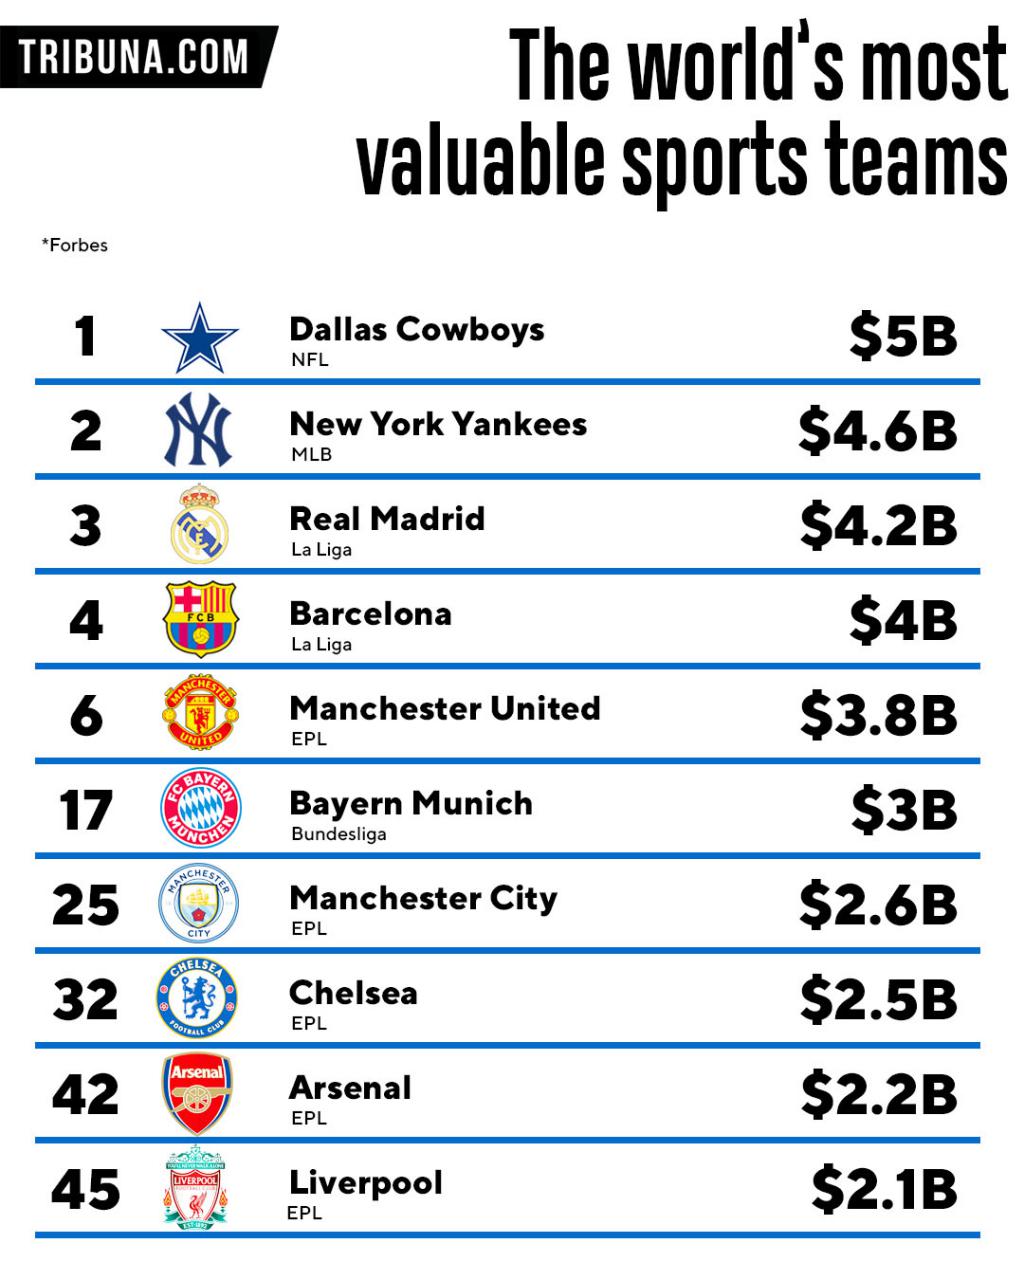 Forbes: Chelsea ranked 32nd among most valuable pro sports club